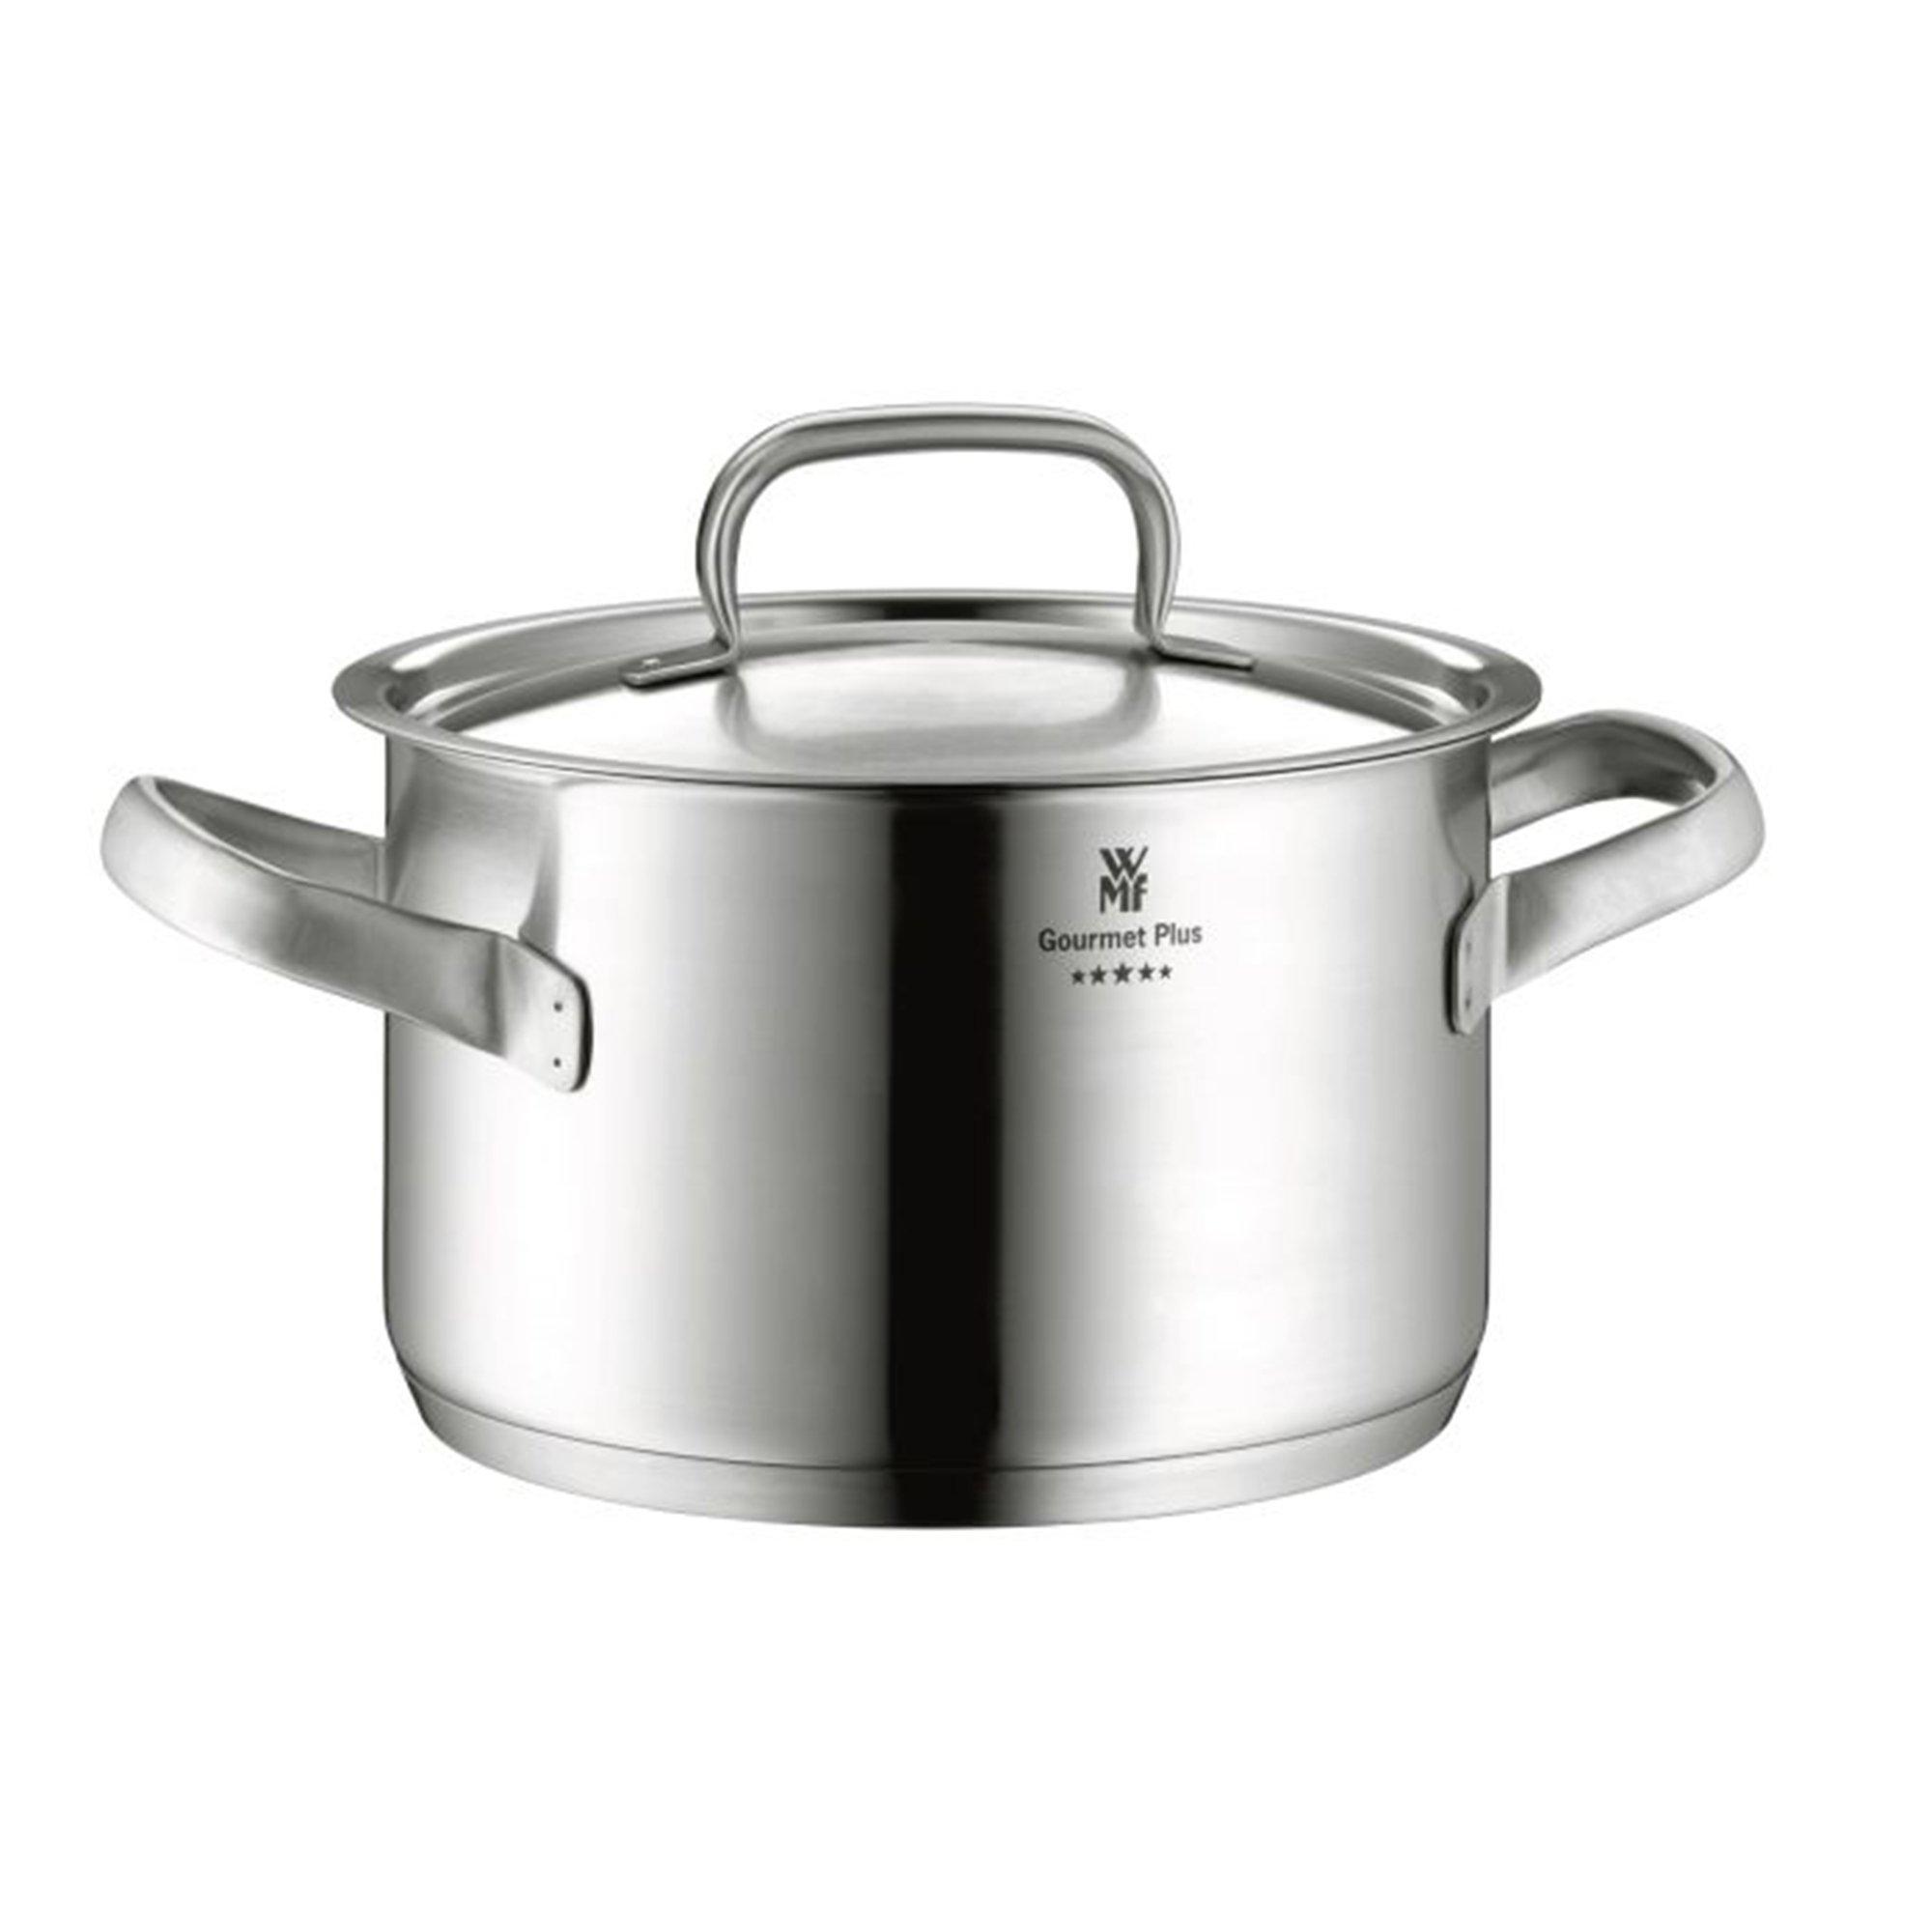 WMF Gourmet Plus 0724246030 high cooking pot 24 cm with lid